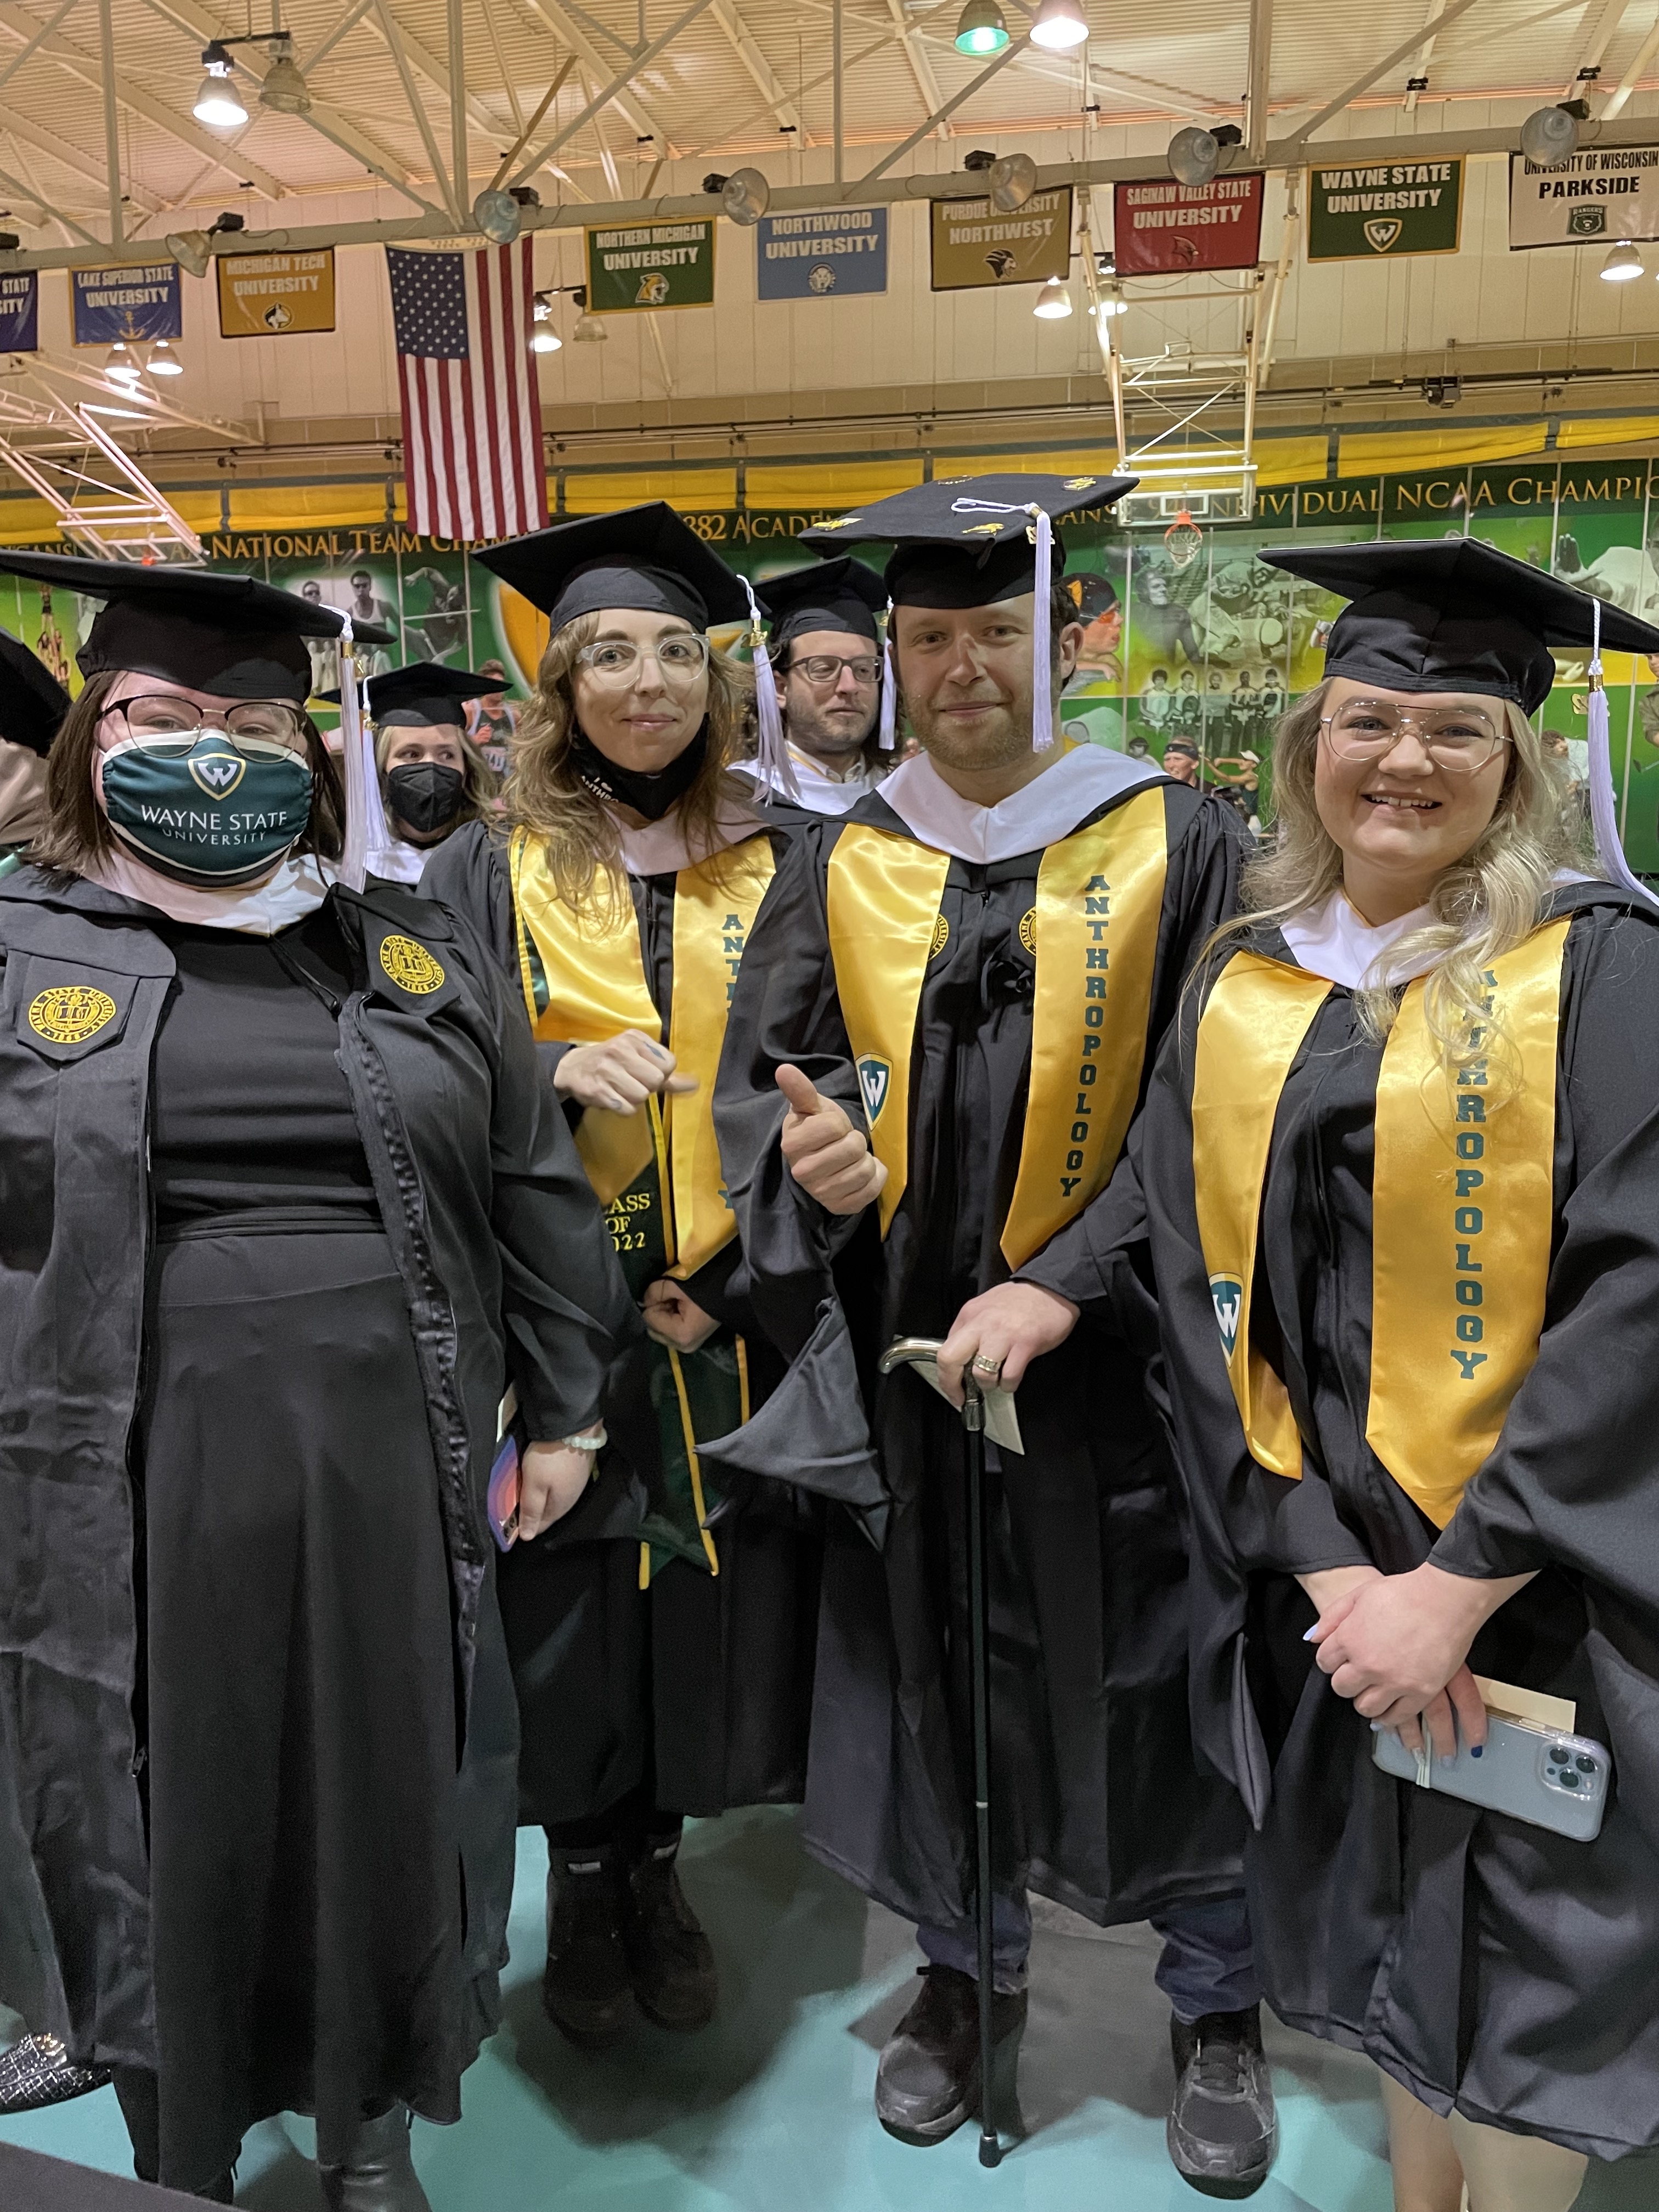 Anthro graduates Brittney O'Neal, Lindsey Sharp, Justin Mazzola and Jenna Huntley at commencement